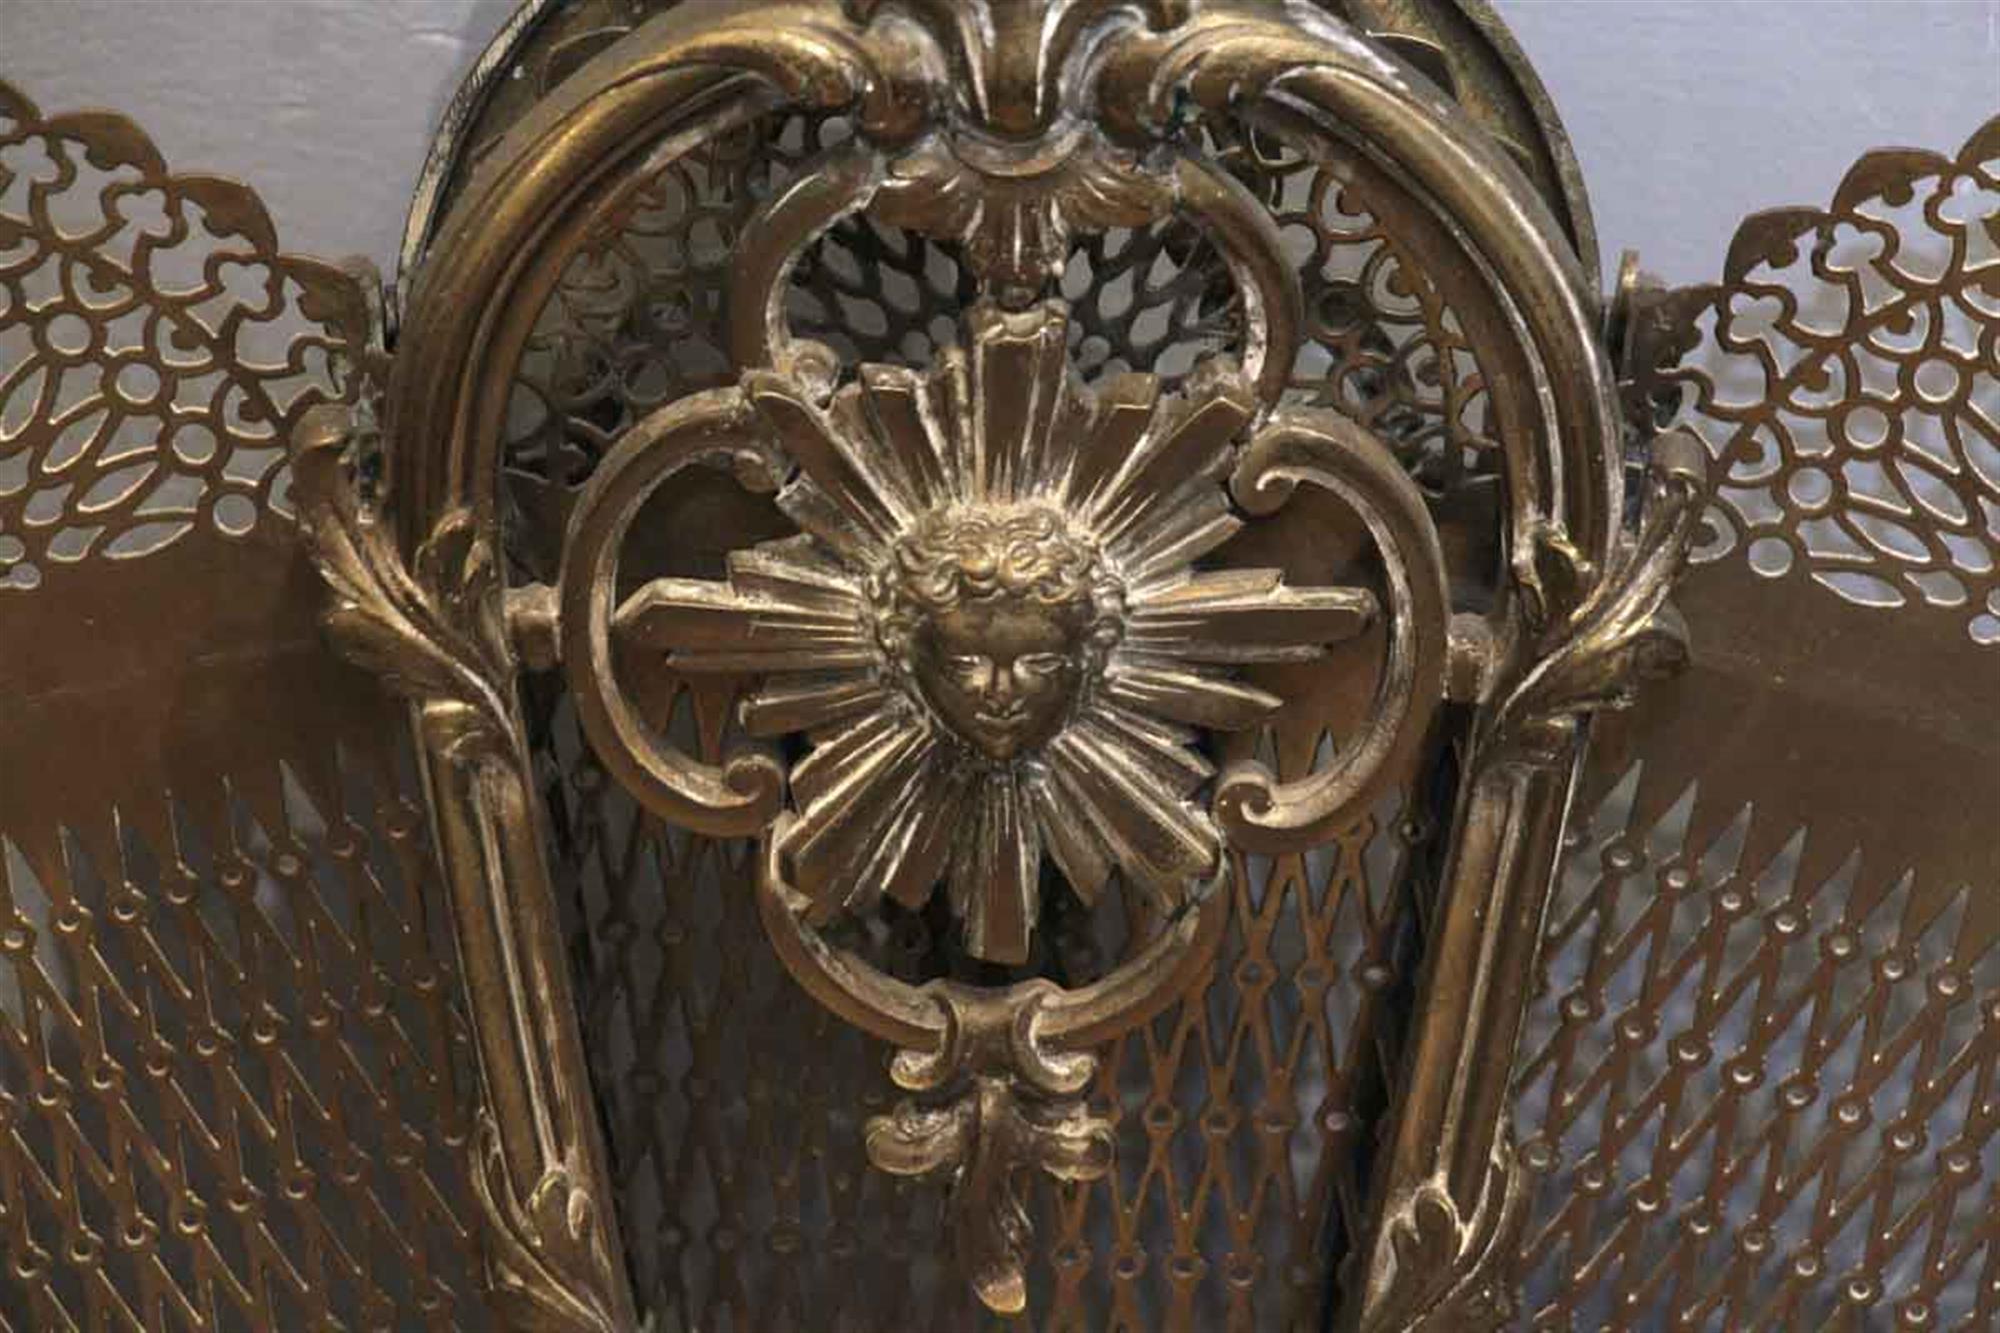 1930s polished brass fireplace fan screen with figural and decorative details. In excellent condition. This can be seen at our 5 East 16th St location on Union Square in Manhattan.